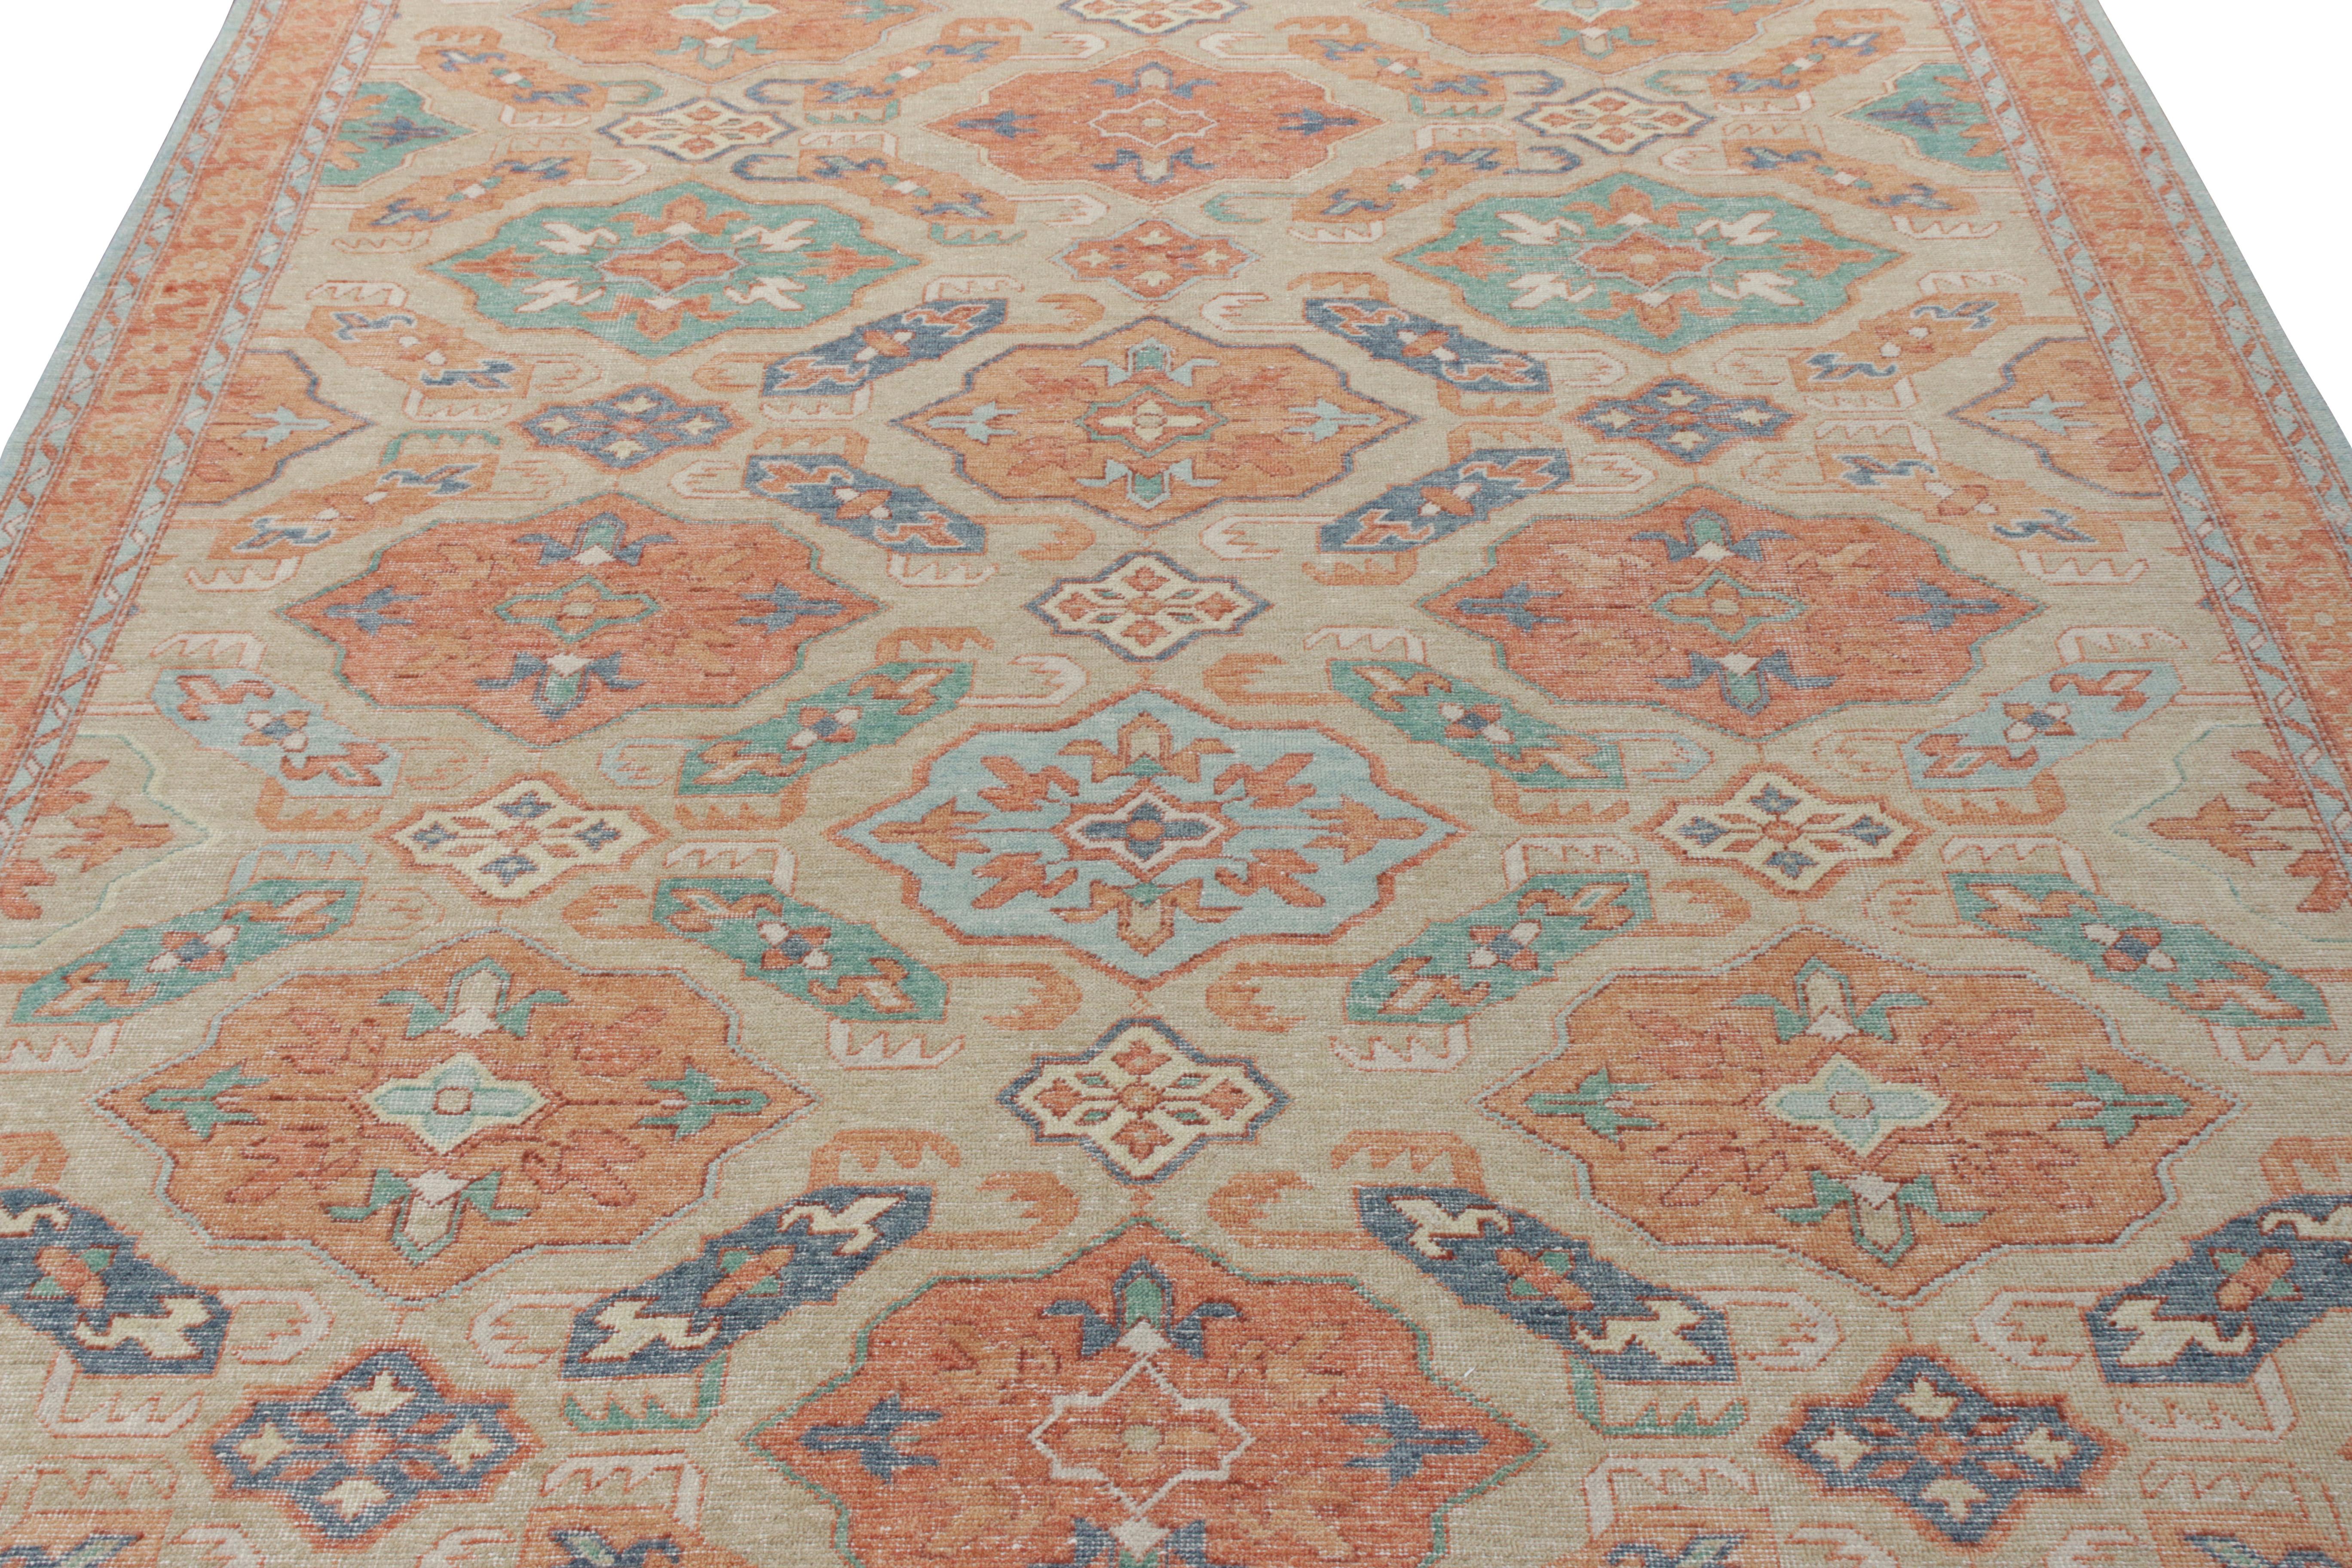 A delicious 9x12 edition of a hand-knotted custom rug design, available from Rug & Kilim’s Homage Collection. This traditional rendering in distressed style showcases a gorgeous geometric-floral series of medallion patterns in enticing tones of blue